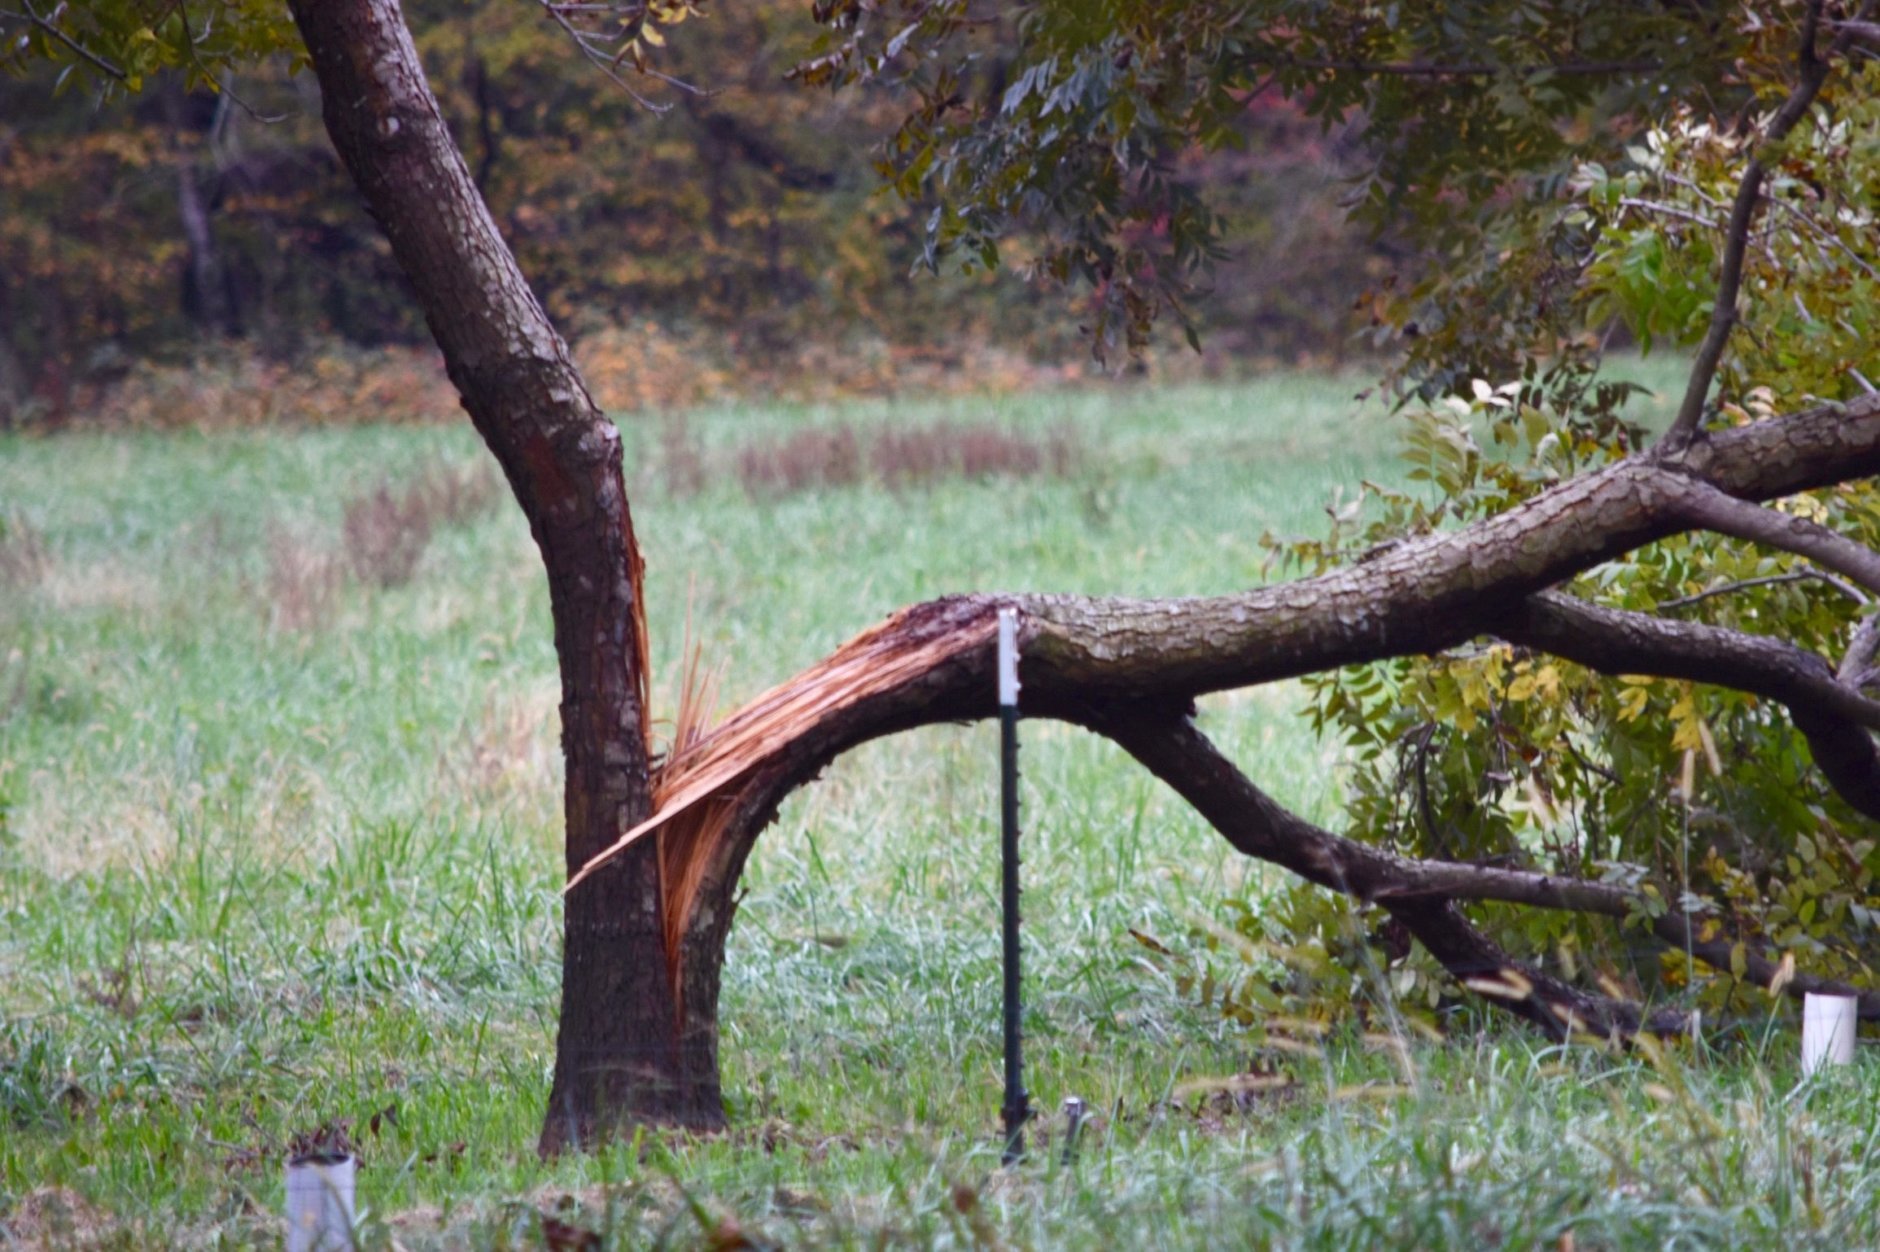 Friday night's storms also caused some minor tree damage. (WTOP/Dave Dildine)